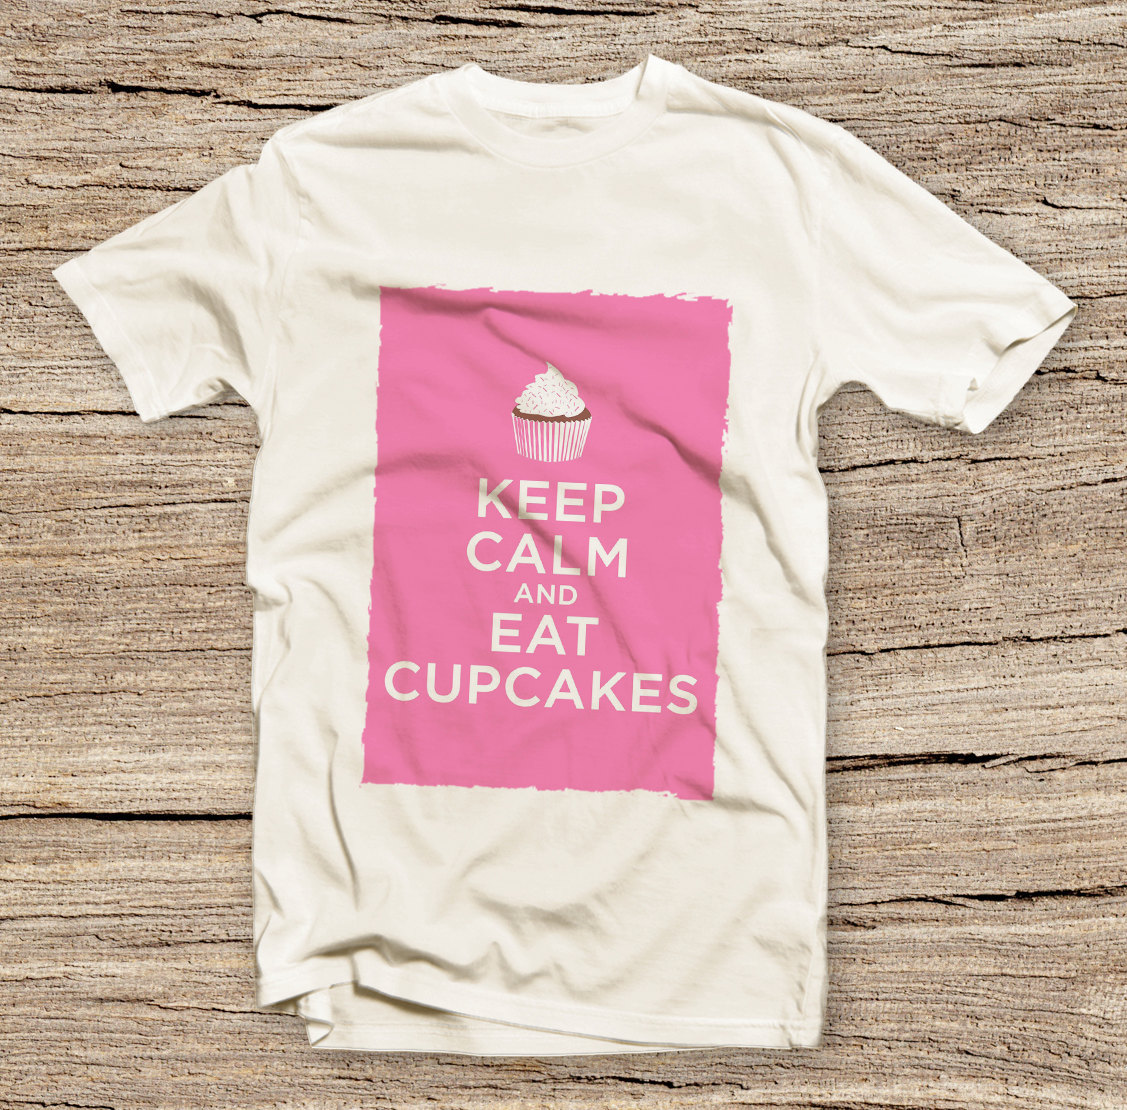 Pts-041 Keep Calm And Eat Cupcakes, Fashion Style Printed T-shirt